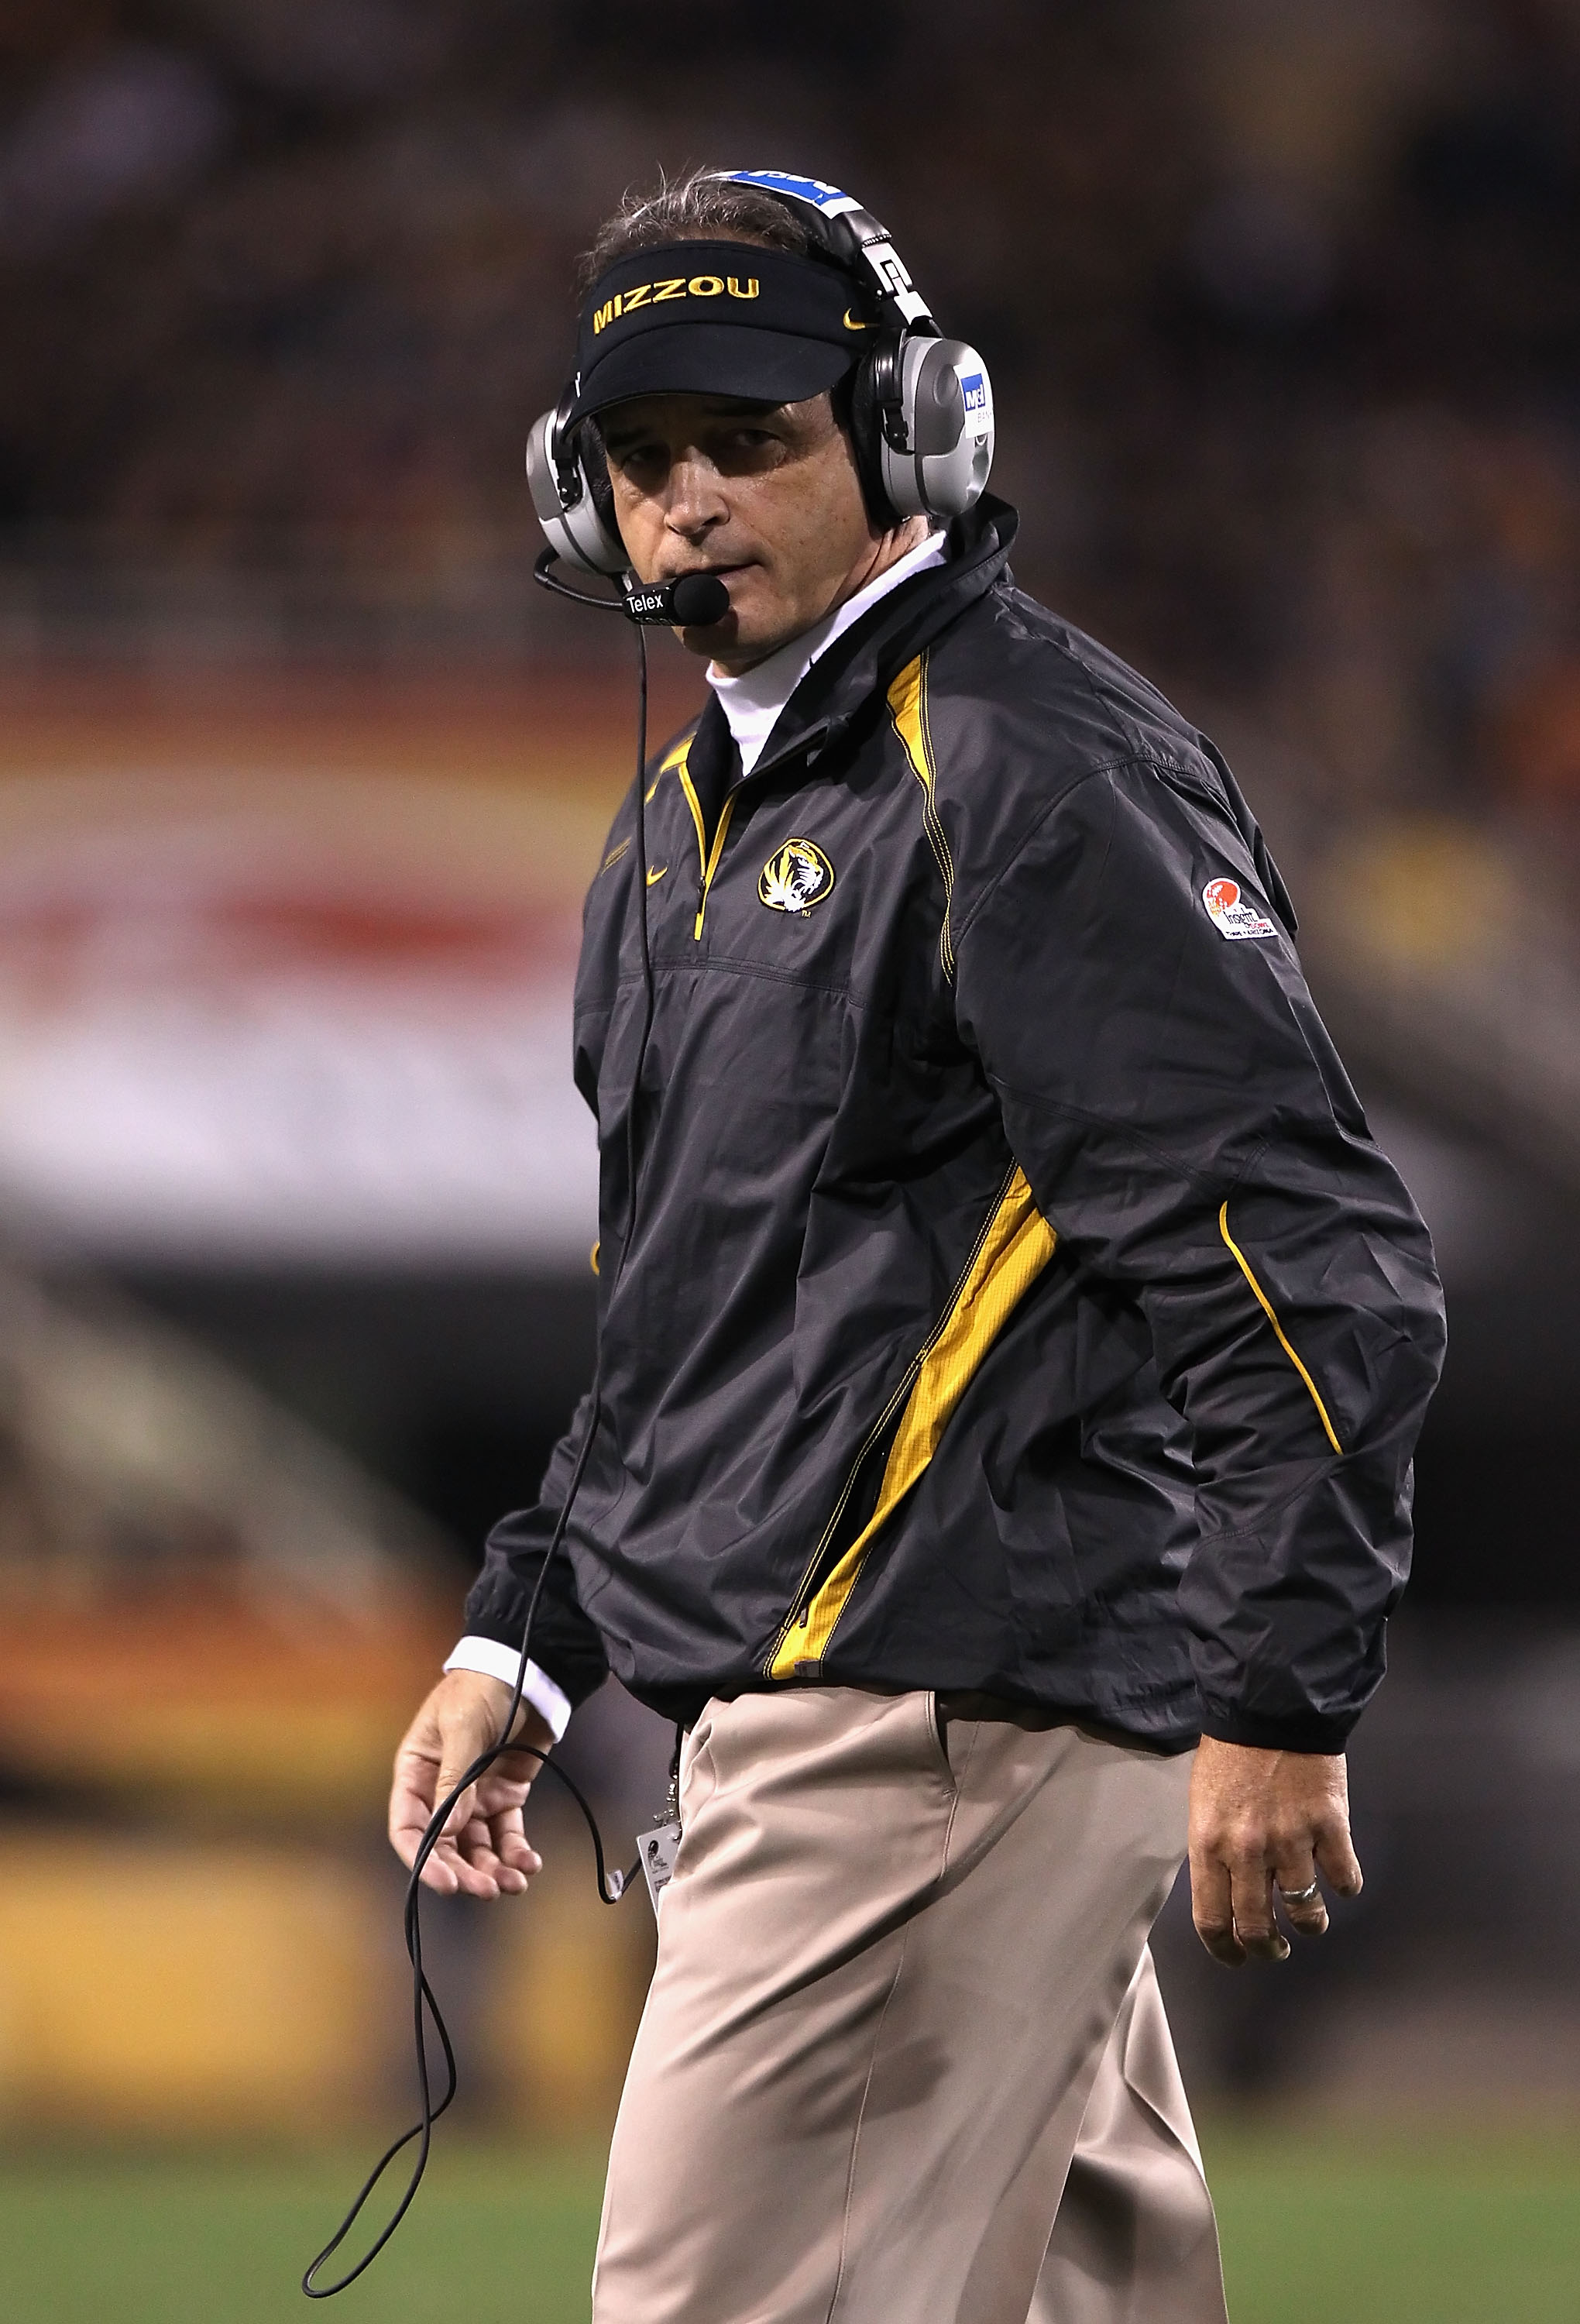 TEMPE, AZ - DECEMBER 28:  Head coach Gary Pinkel of the Missouri Tigers reacts on the sidelines during the Insight Bowl against the Iowa Hawkeyes at Sun Devil Stadium on December 28, 2010 in Tempe, Arizona.  The Hawkeyes defeated the Tigers 27-24.  (Photo